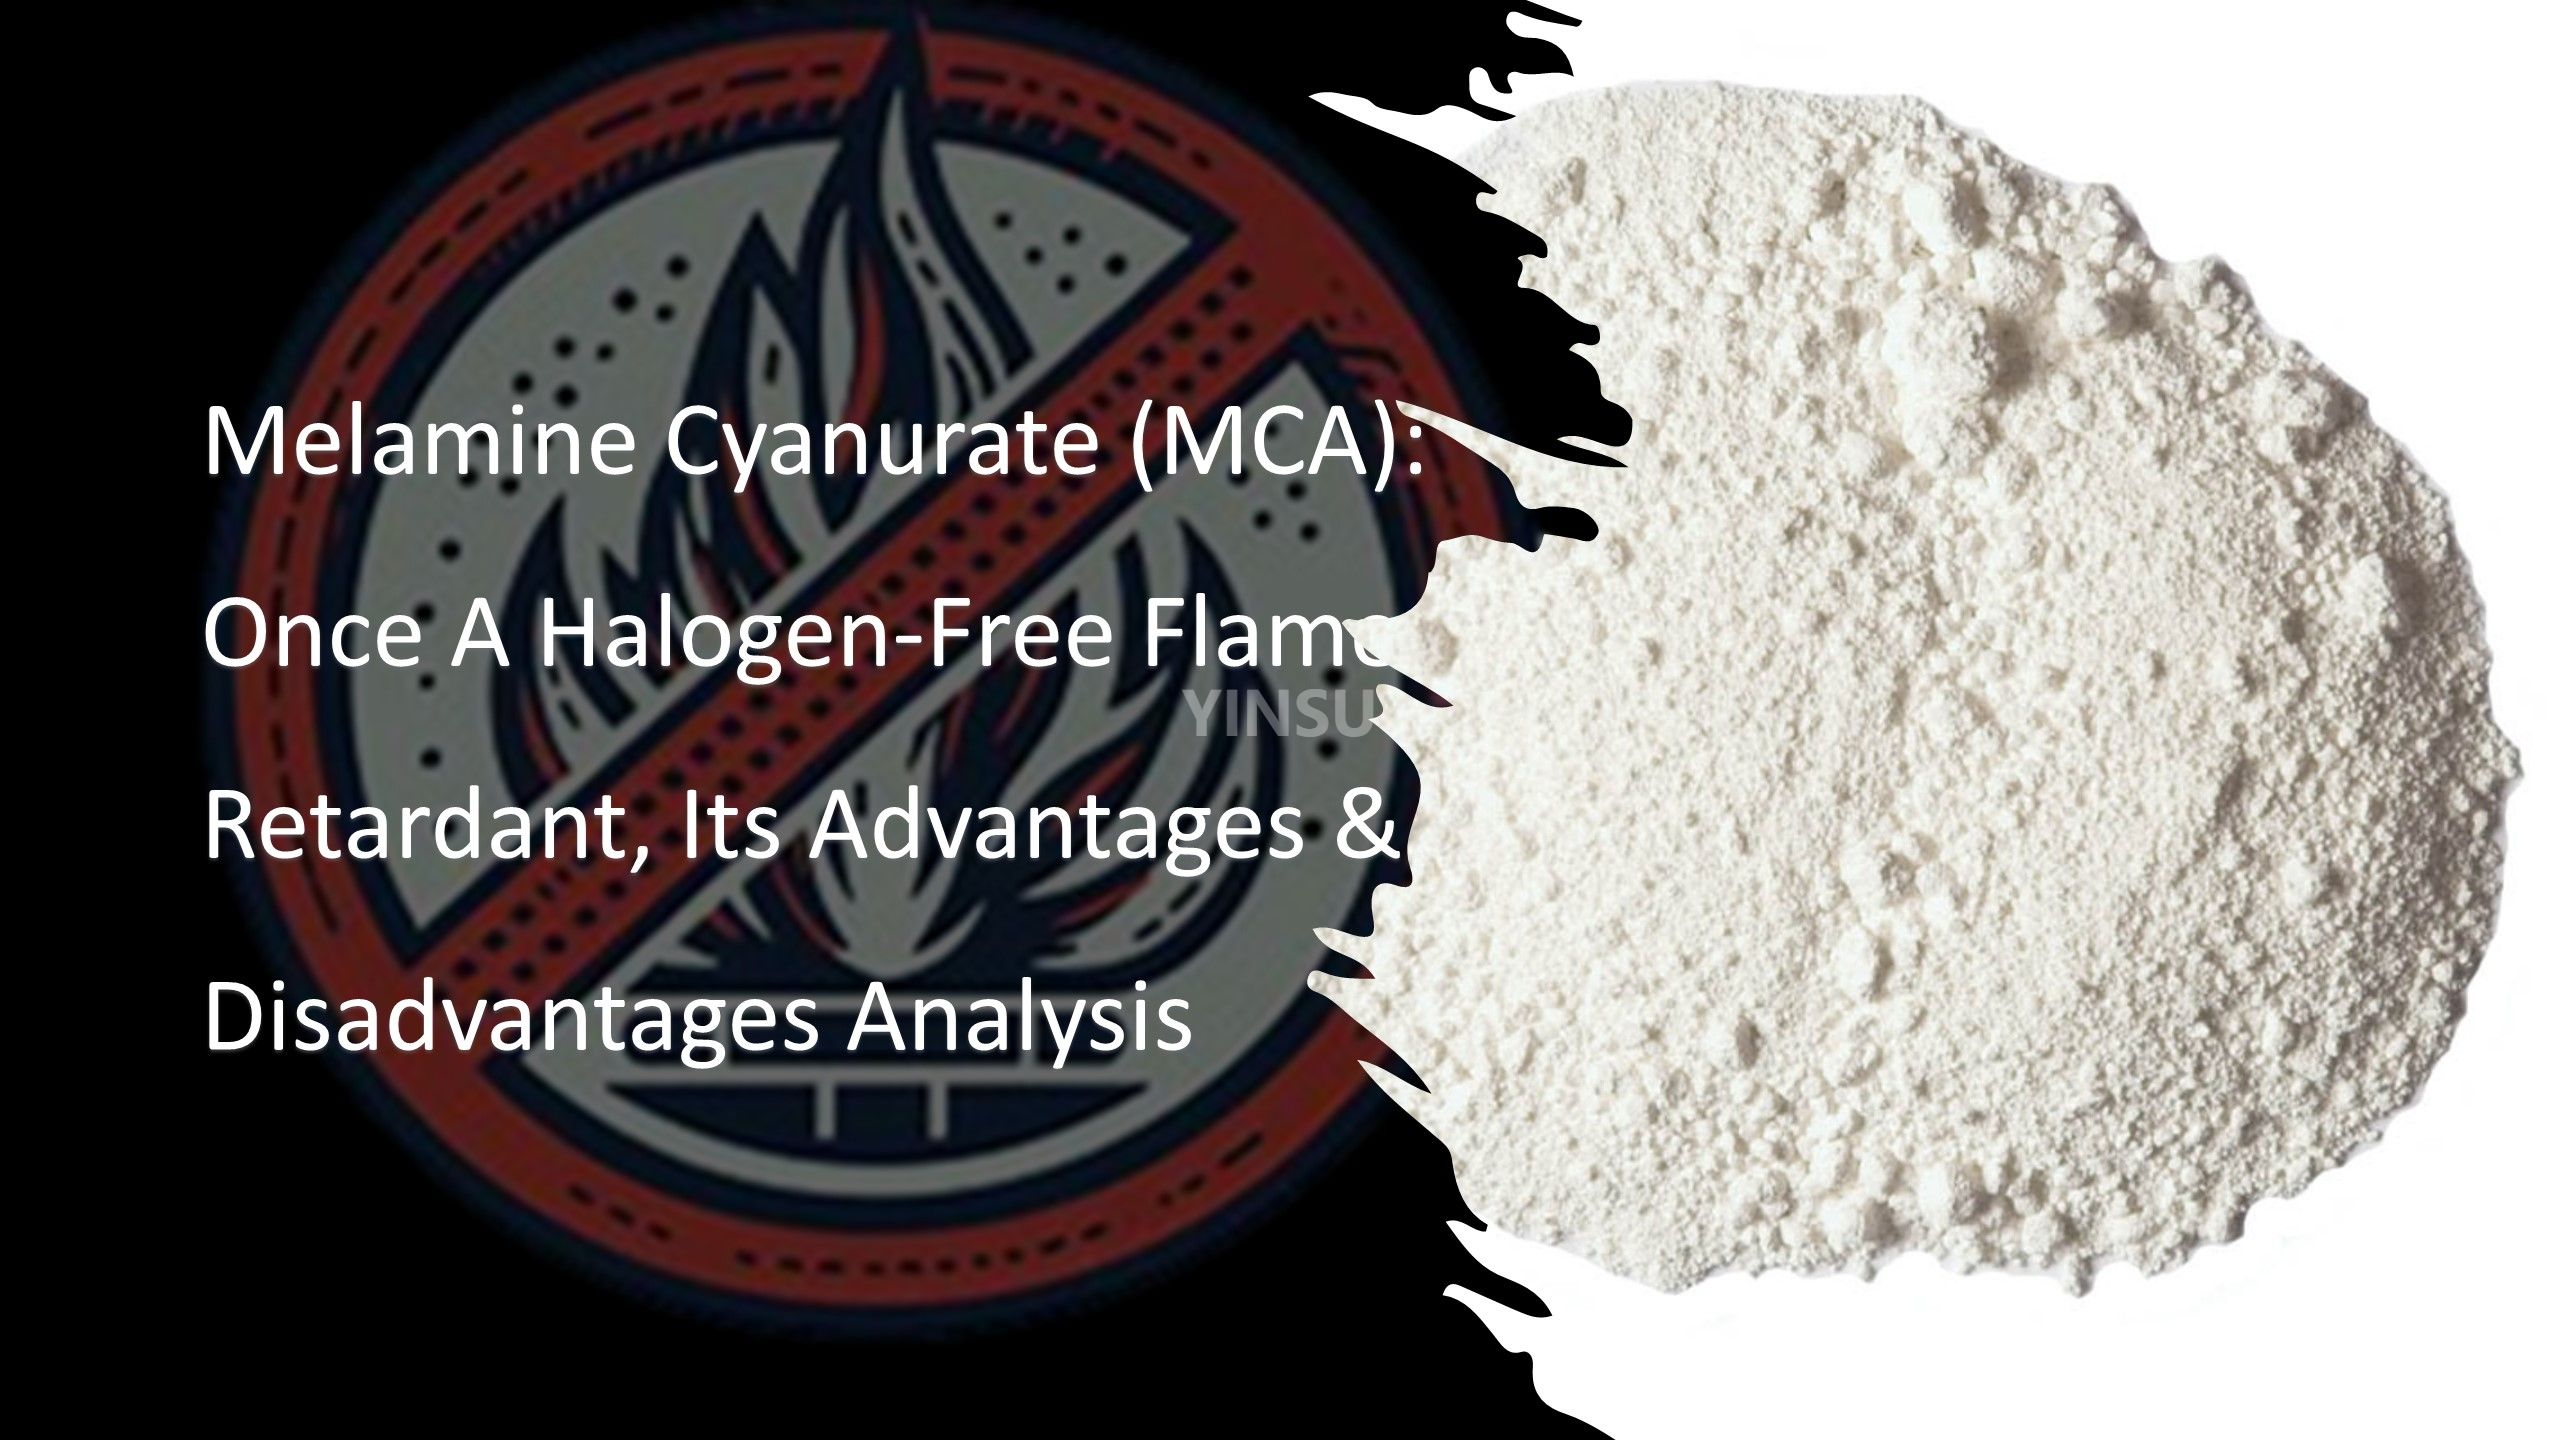 Melamine Cyanurate (MCA): Once A Halogen-Free Flame Retardant, Its Advantages & Disadvantages Analysis